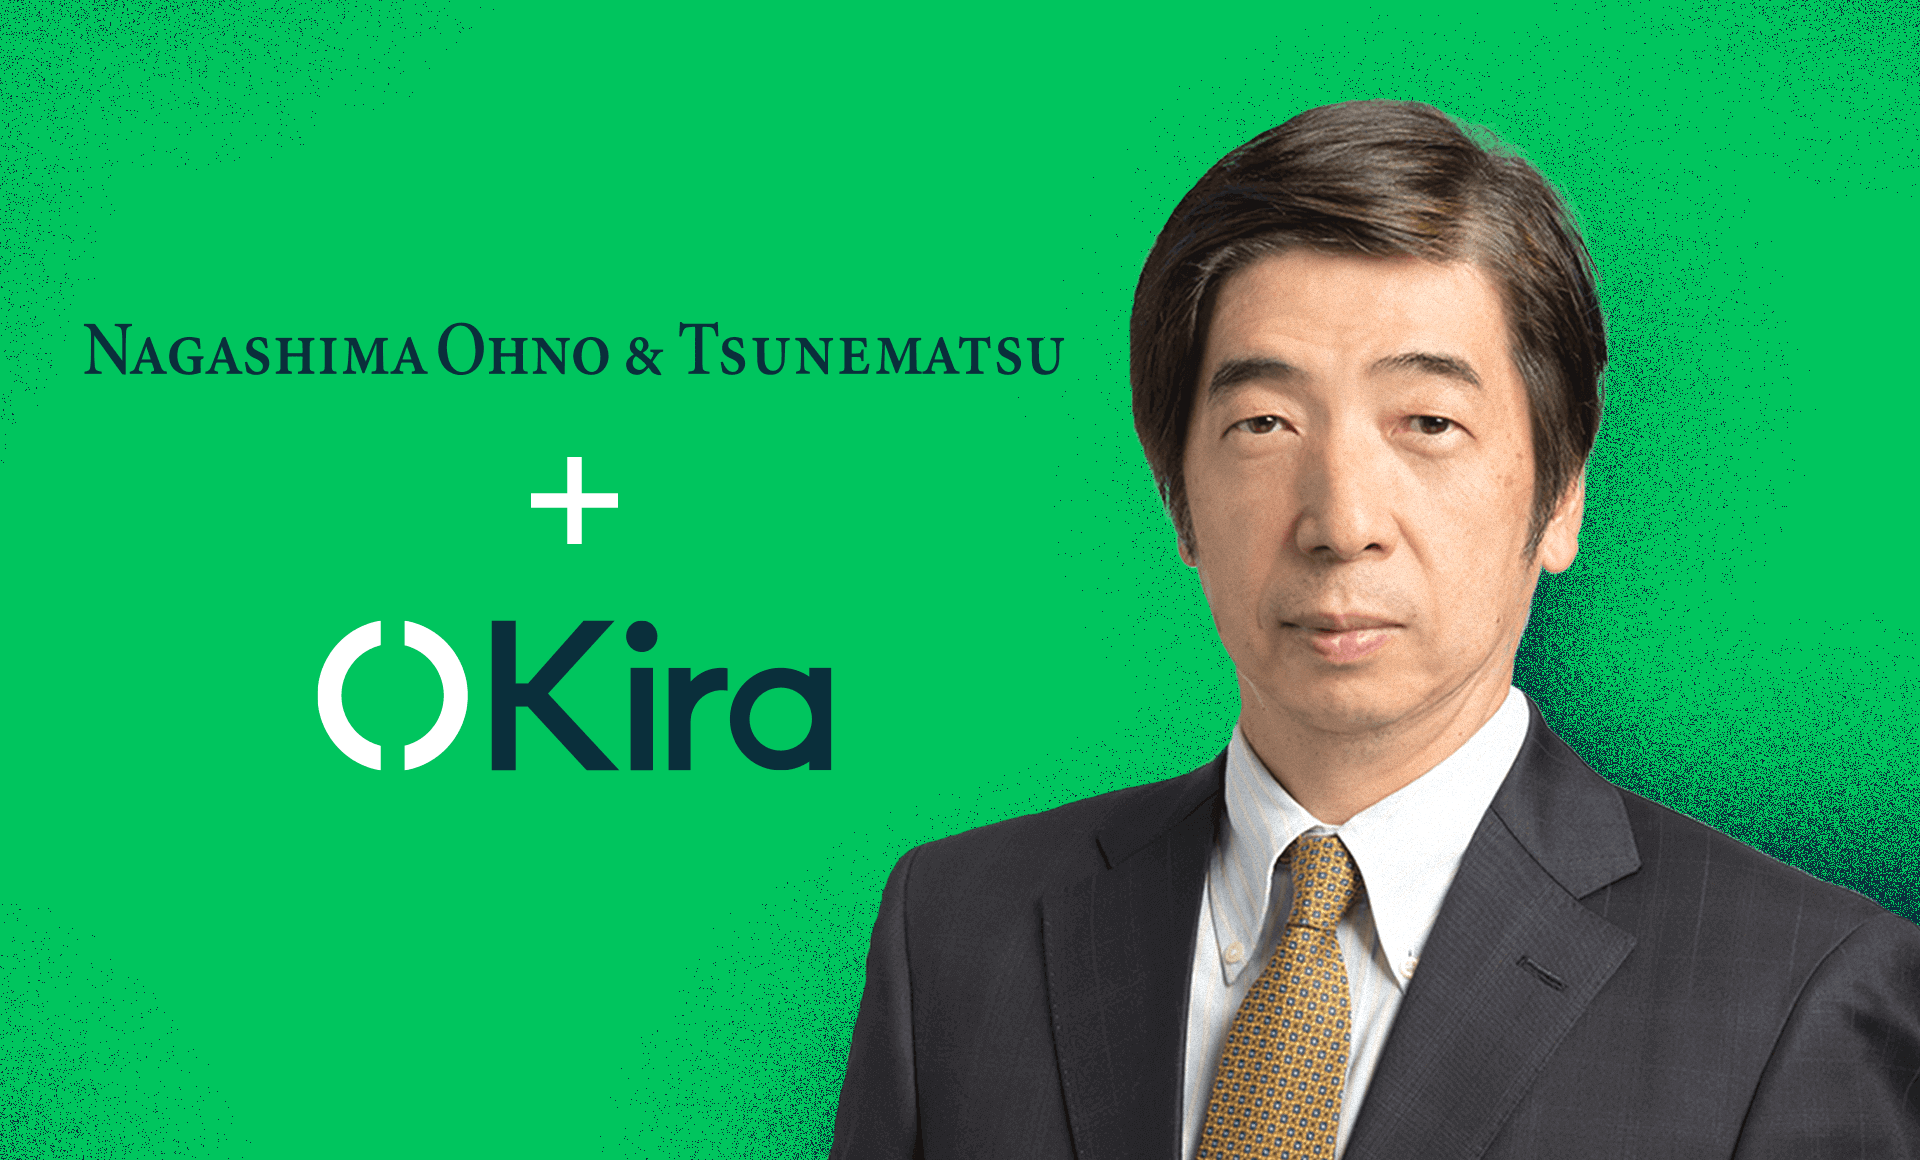 Read the blog article: Nagashima Ohno & Tsunematsu is the First Law Firm in Japan to Adopt Kira Across its Mergers and Acquisitions Practice 